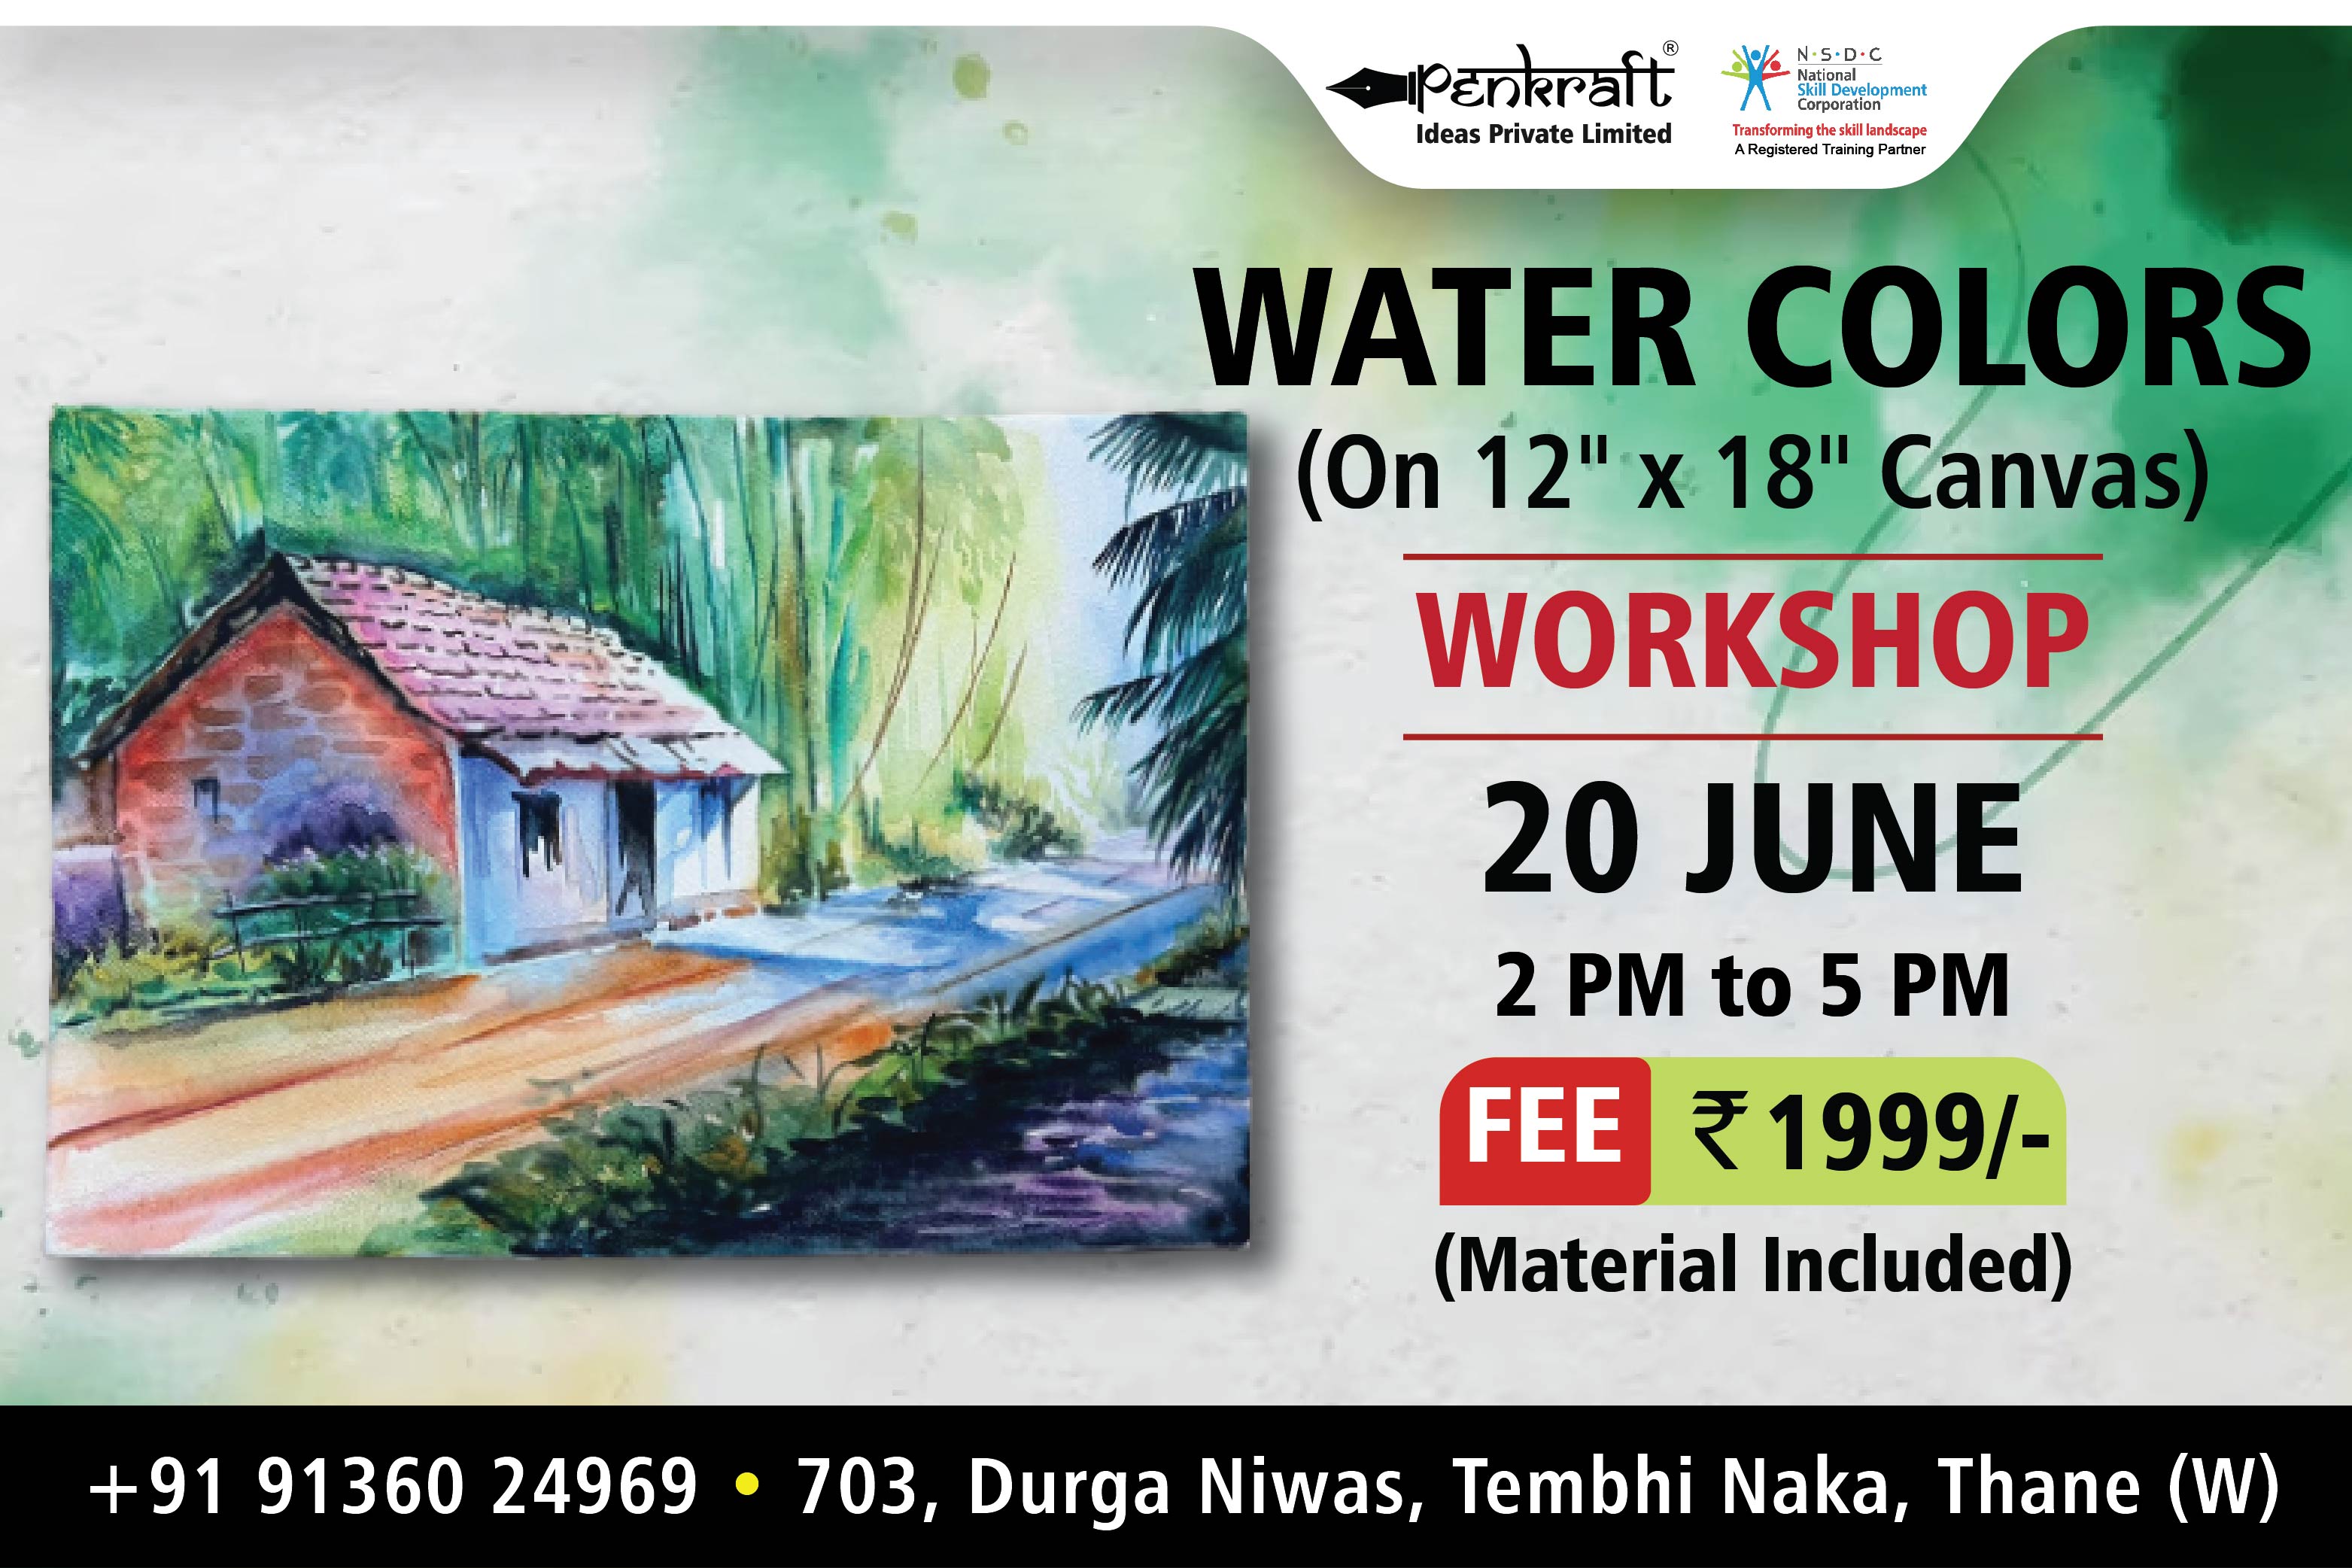 PENKRAFT WATER COLOR PAINTING ON CANVAS WORKSHOP!